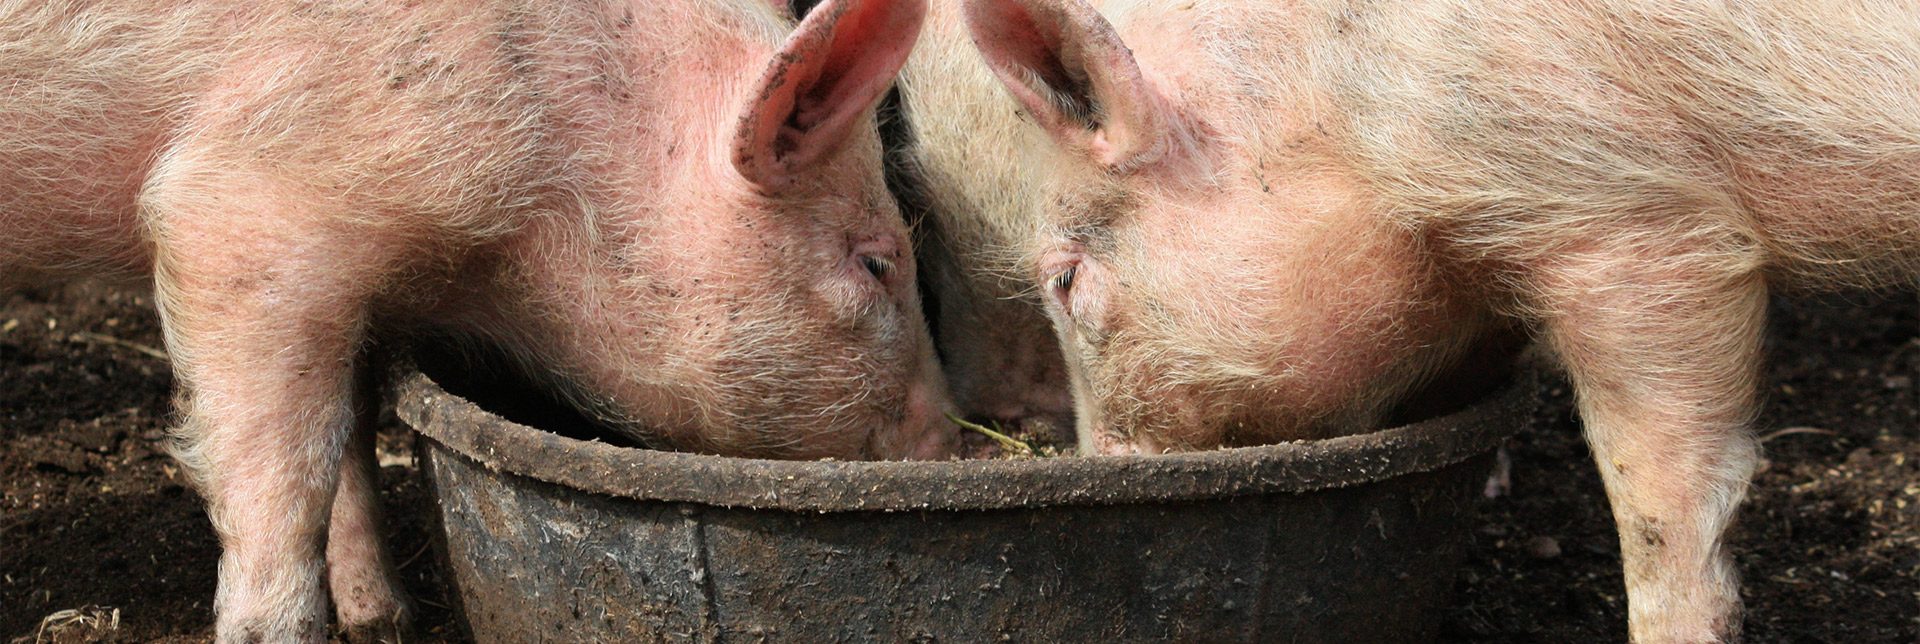 Can Pigs Help Reduce Food Waste?